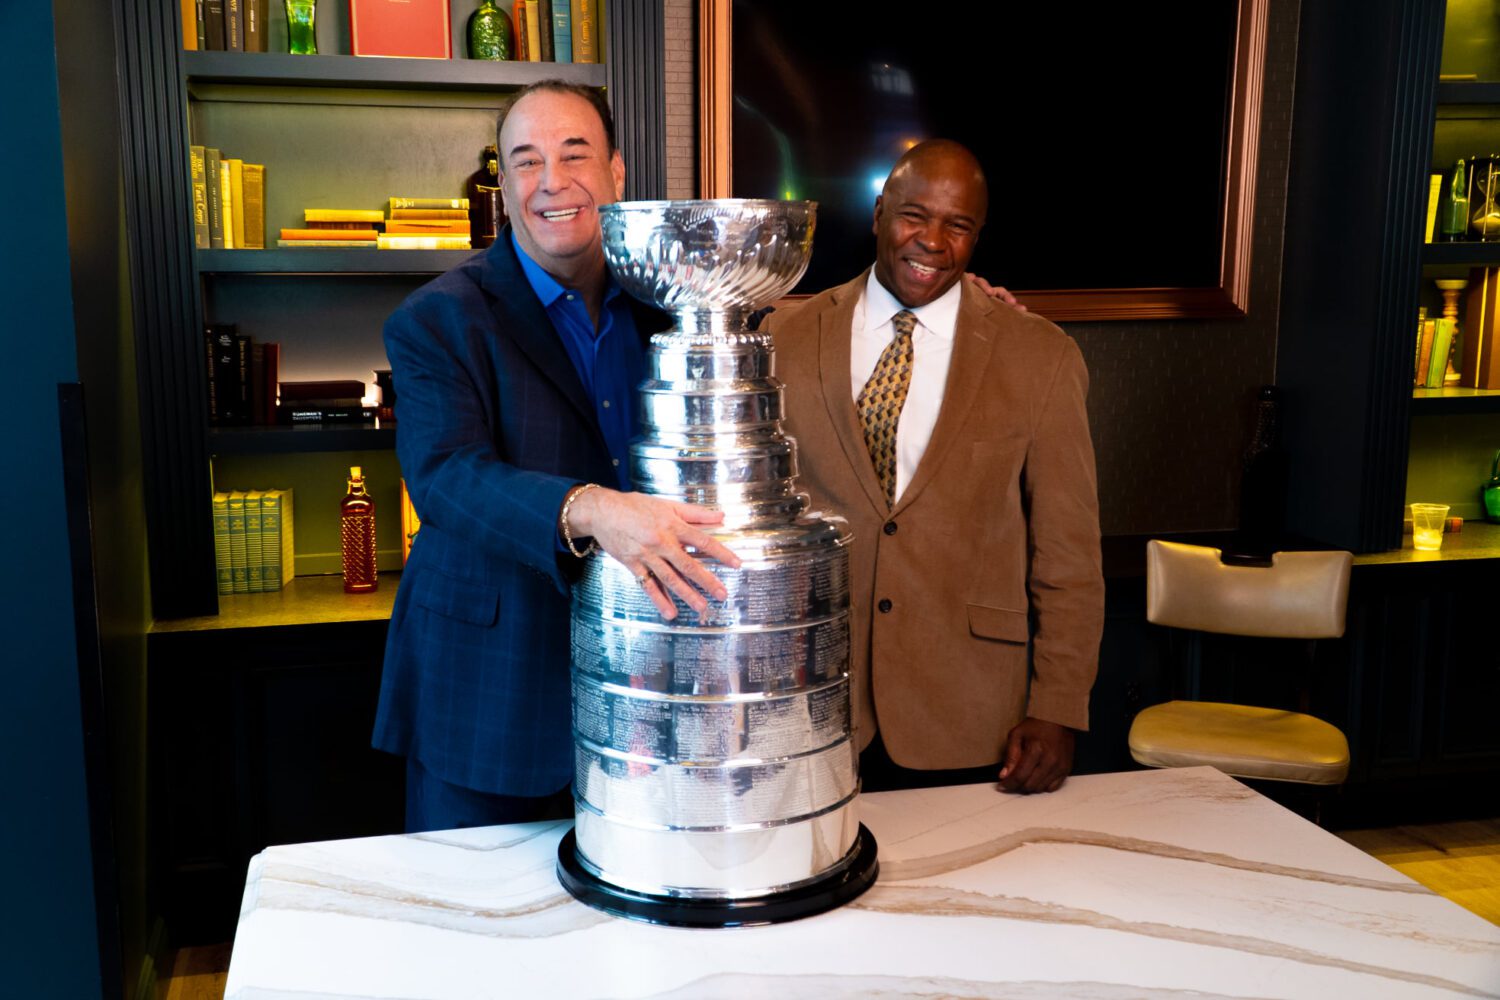 Jon Taffer and another gentleman standing with a large stanley cup on table